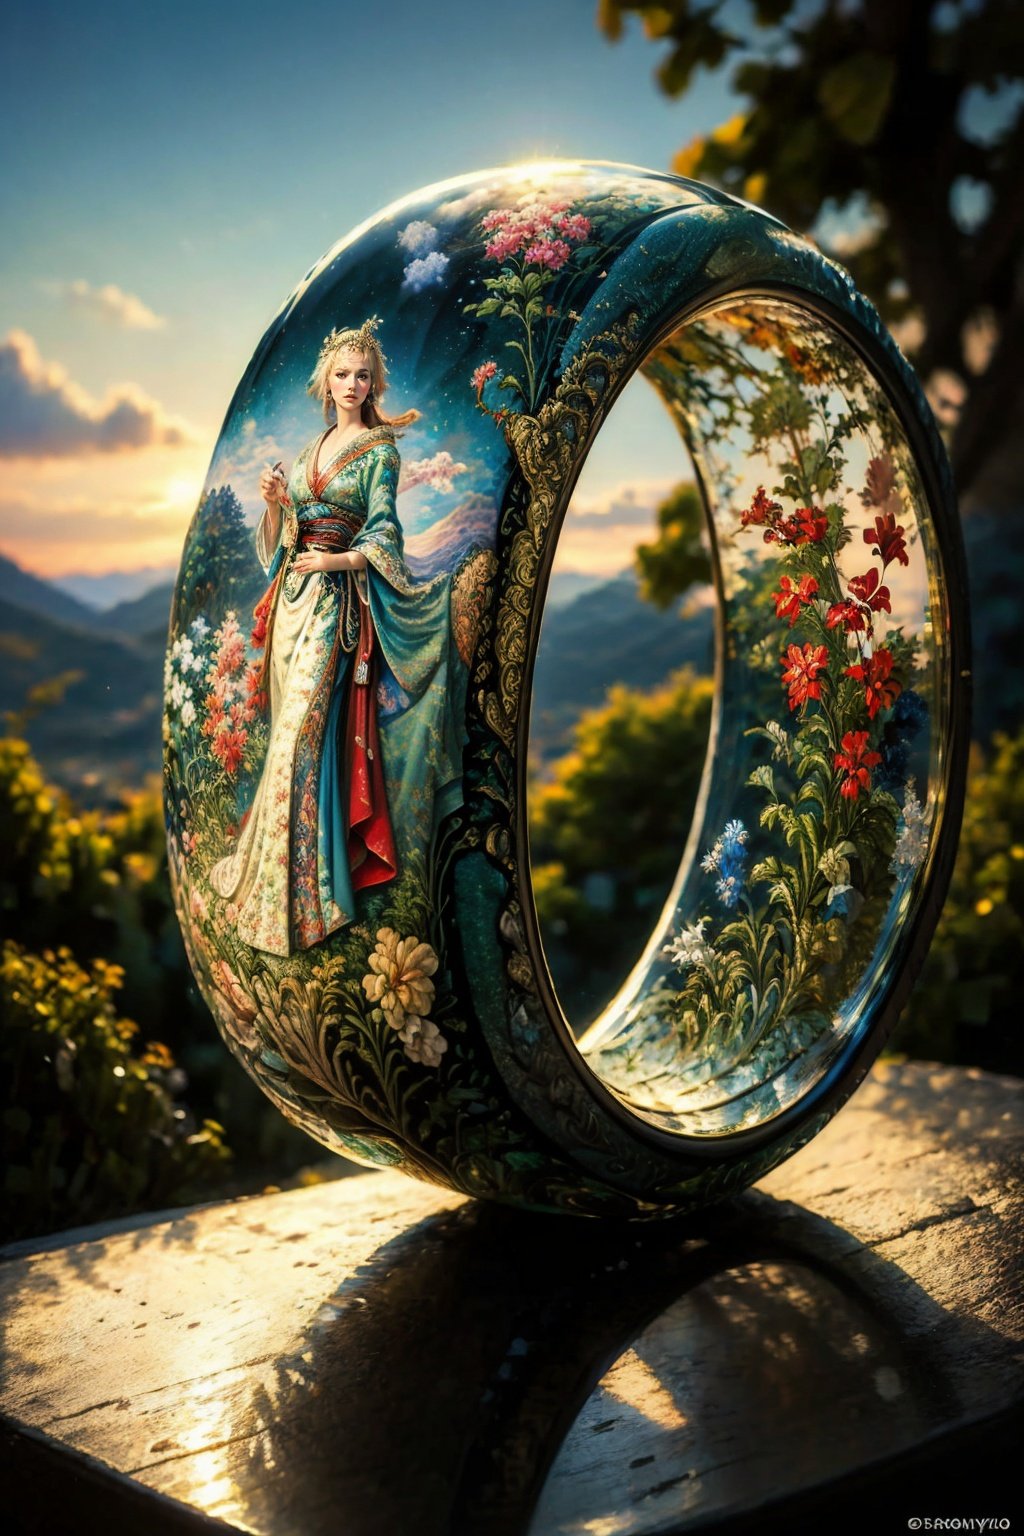 (Glass ring:1.3), masterpiece, best quality, landscape, <lora:RingArt_Sora:0.8>, (style of Boris Vallejo:1.3)
(masterpiece, best quality:1.5), 
Kimono robes, Malaysia, at Golden hour, 